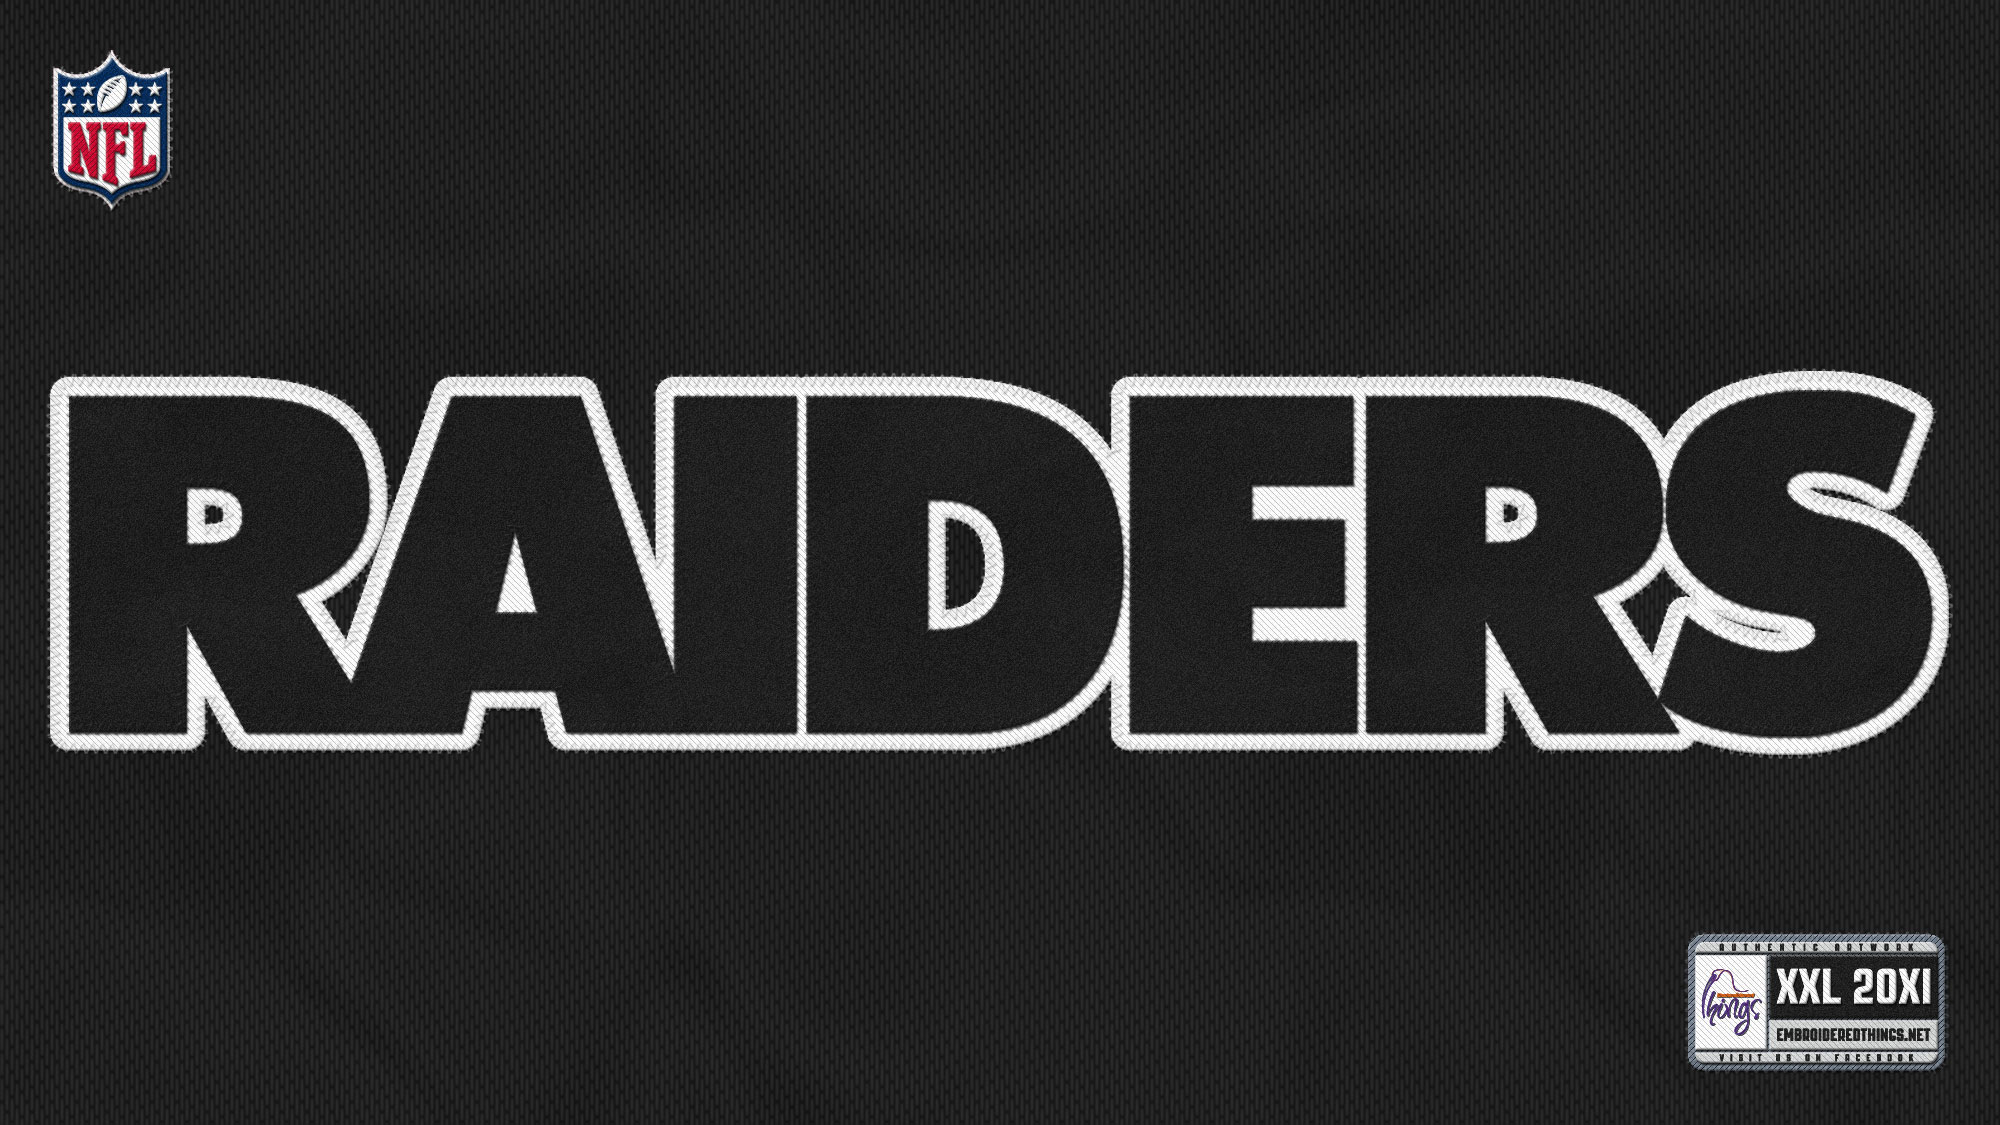 You Like This Oakland Raiders Wallpaper HD Background As Much